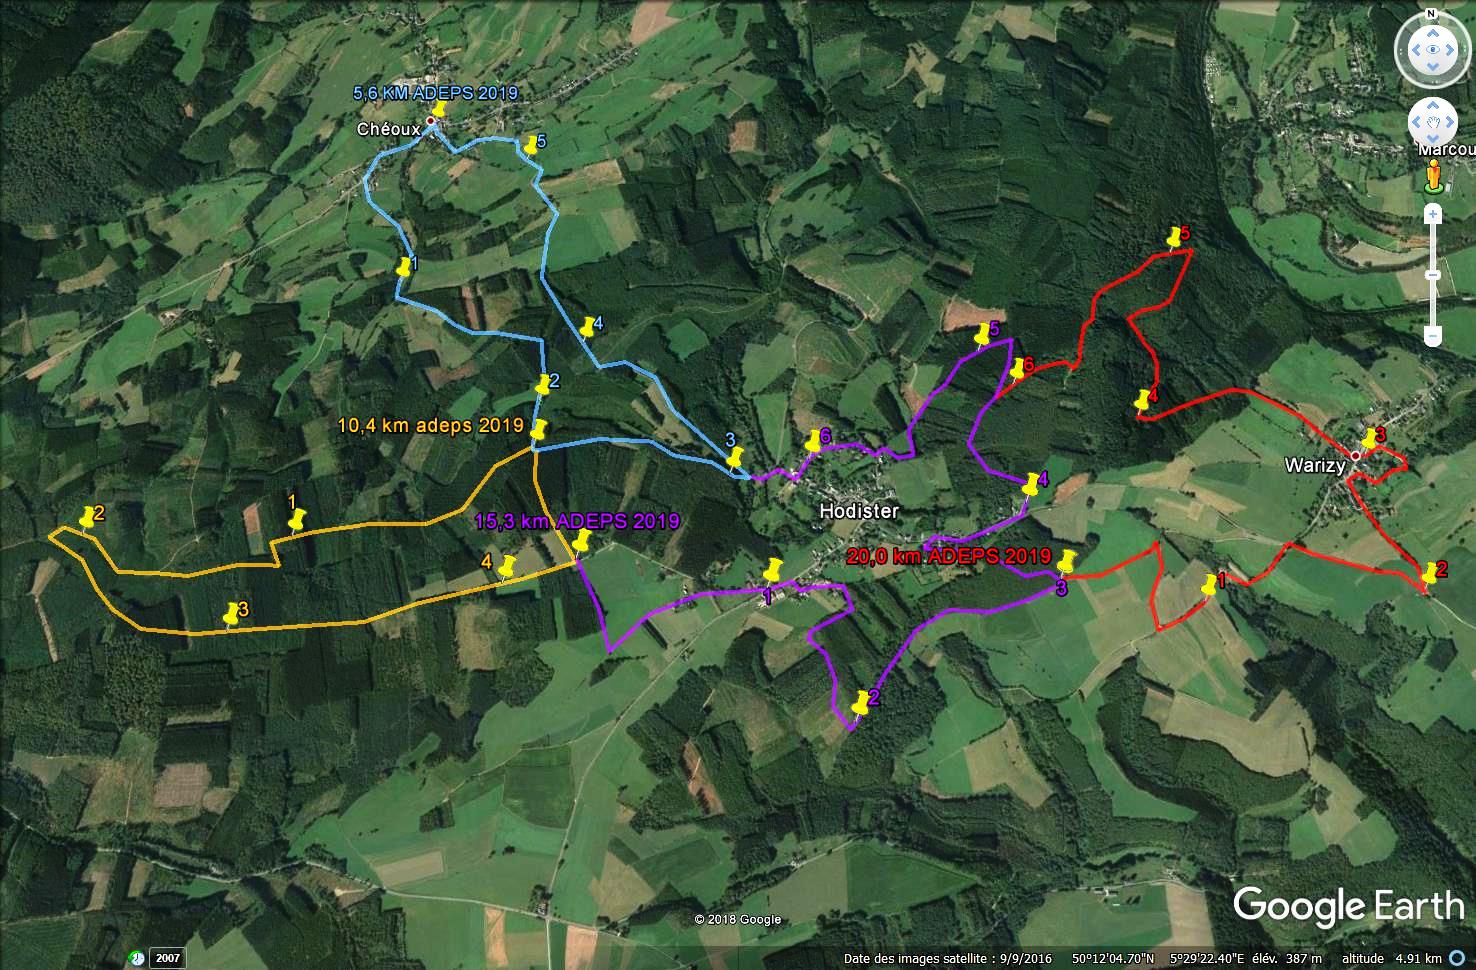 parcours adeps cheoux 2019